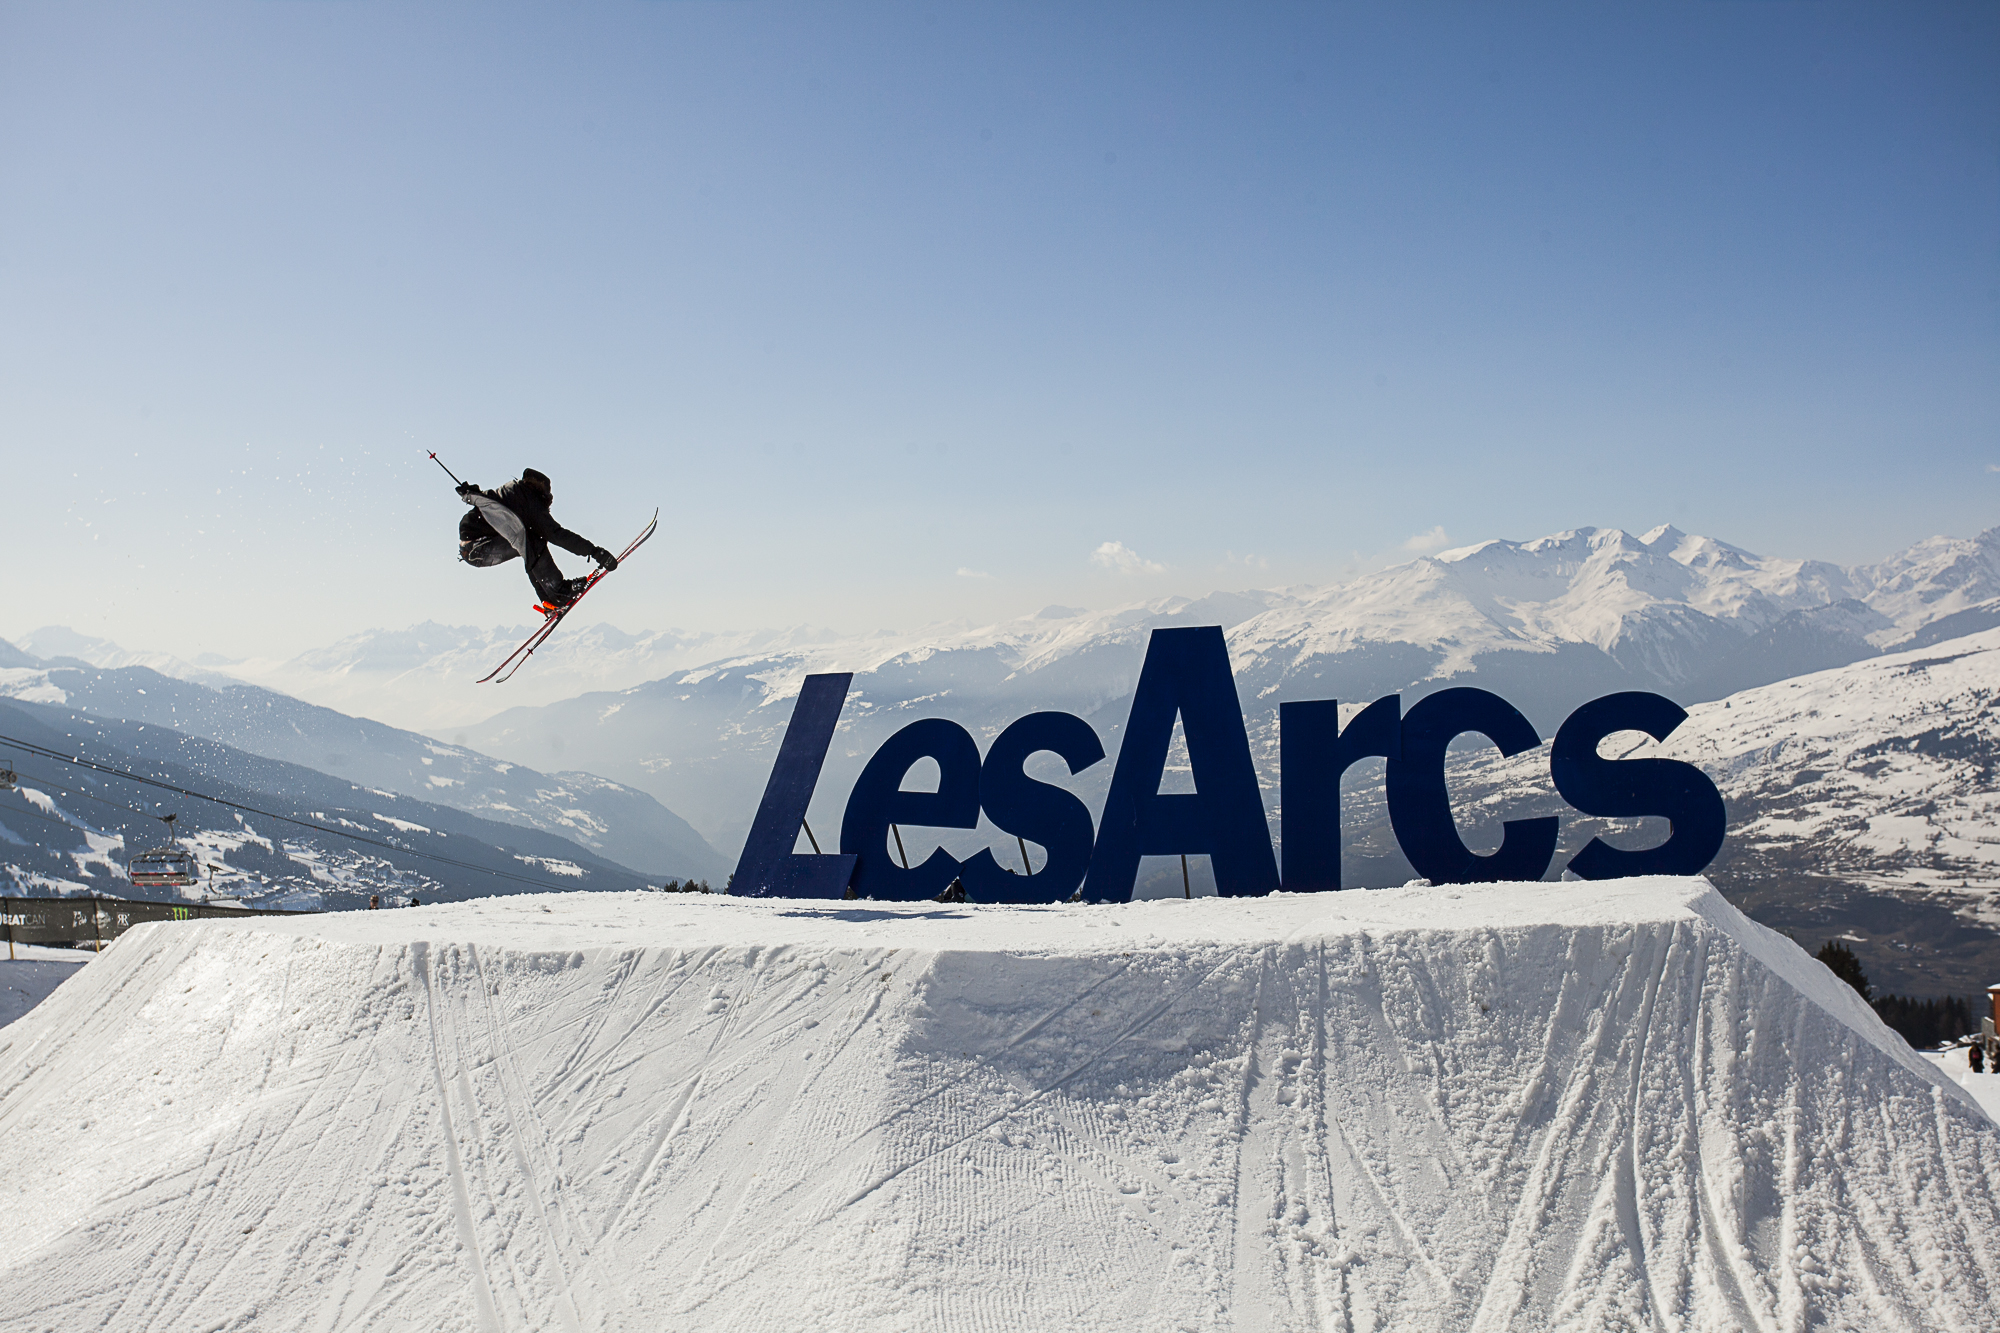 How will covid affect skiing in Les Arcs this winter?